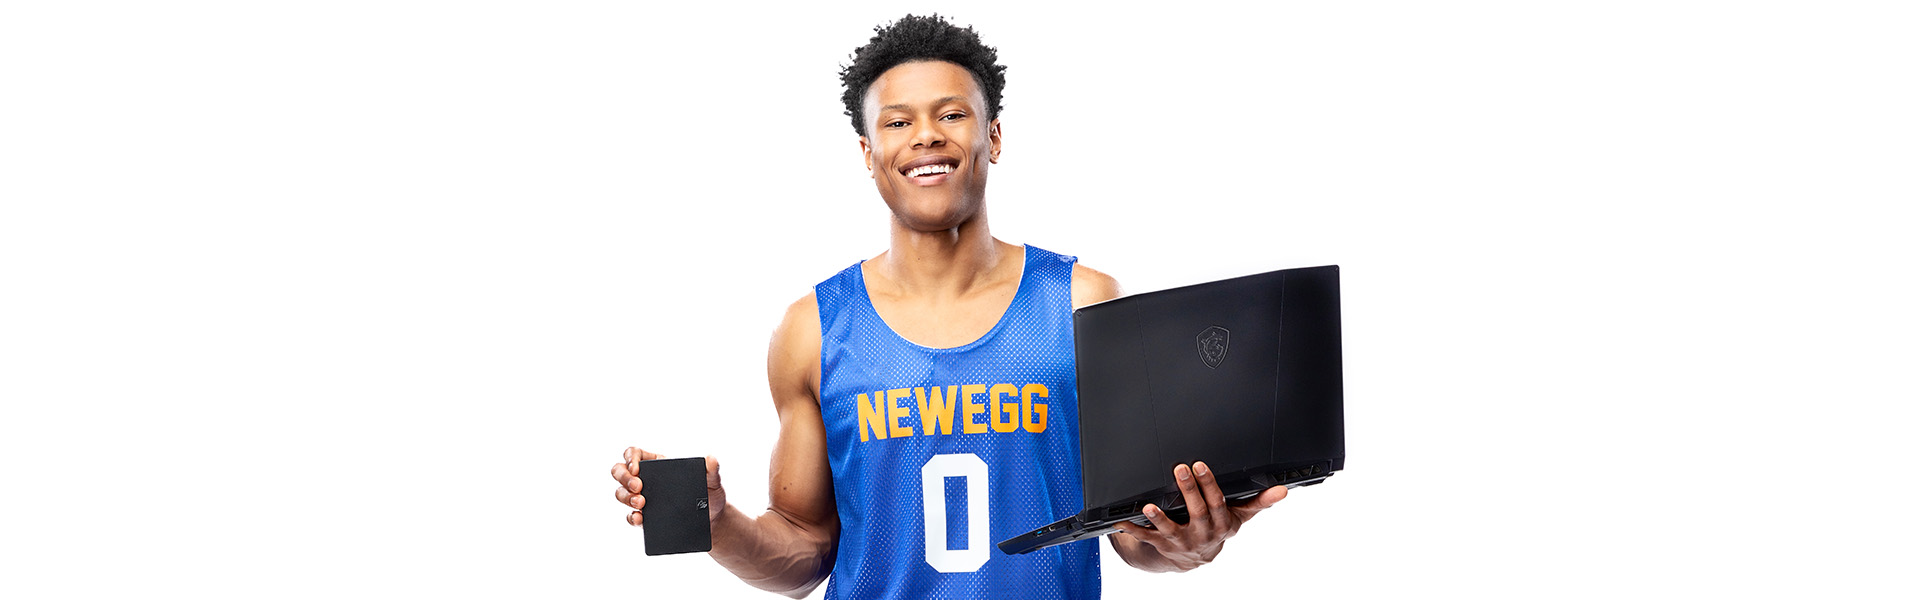 Jaylen Clark of the UCLA Men’s Basketball Team Scores with Newegg, MSI and Seagate Technology